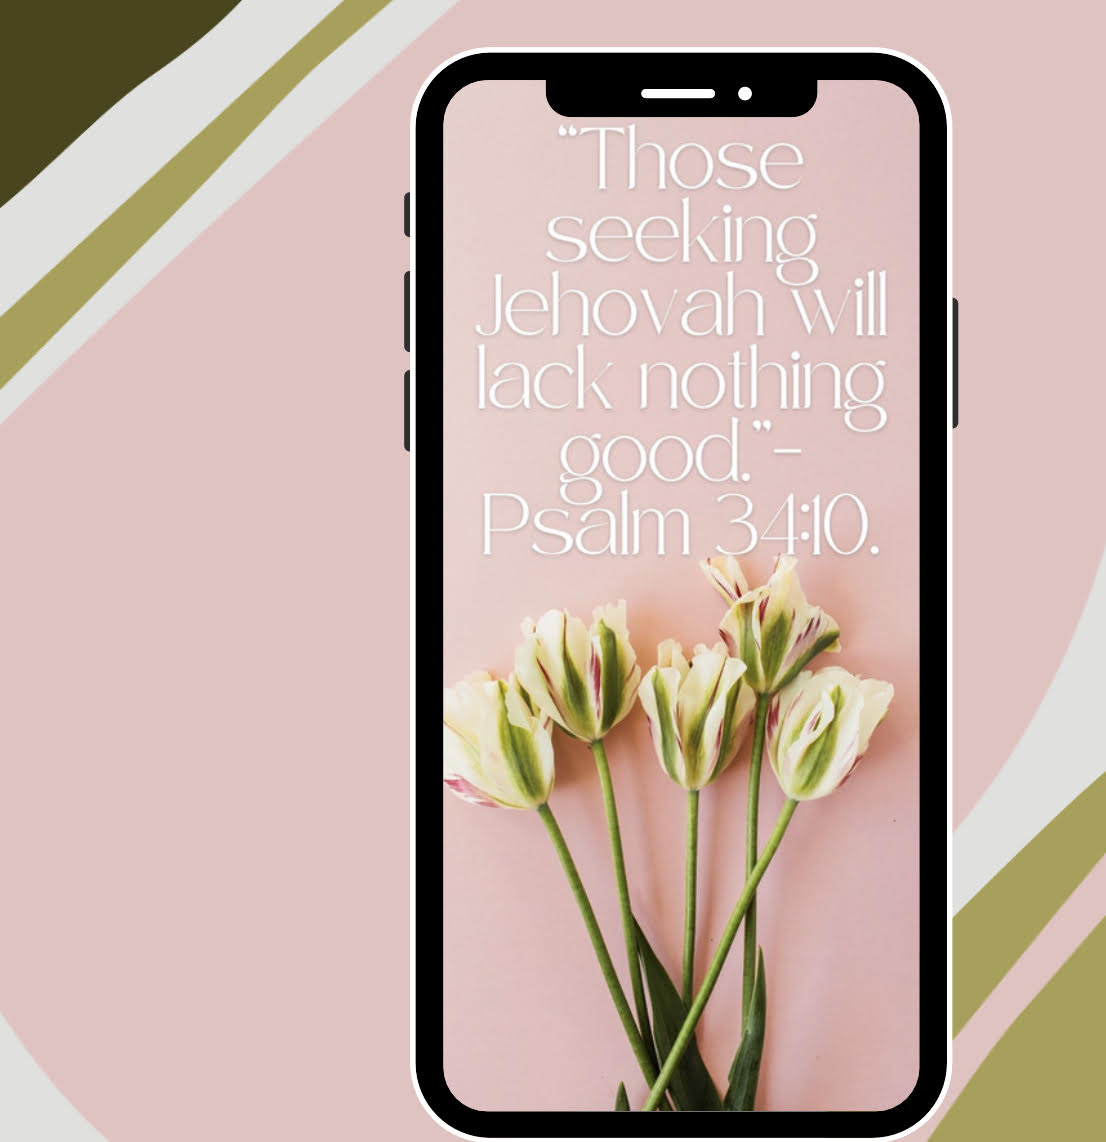 FREE Cell Phone Screensaver Pack - 8 photos - Psalm 34:10, "Those Seeking Jehovah will lack nothing good."